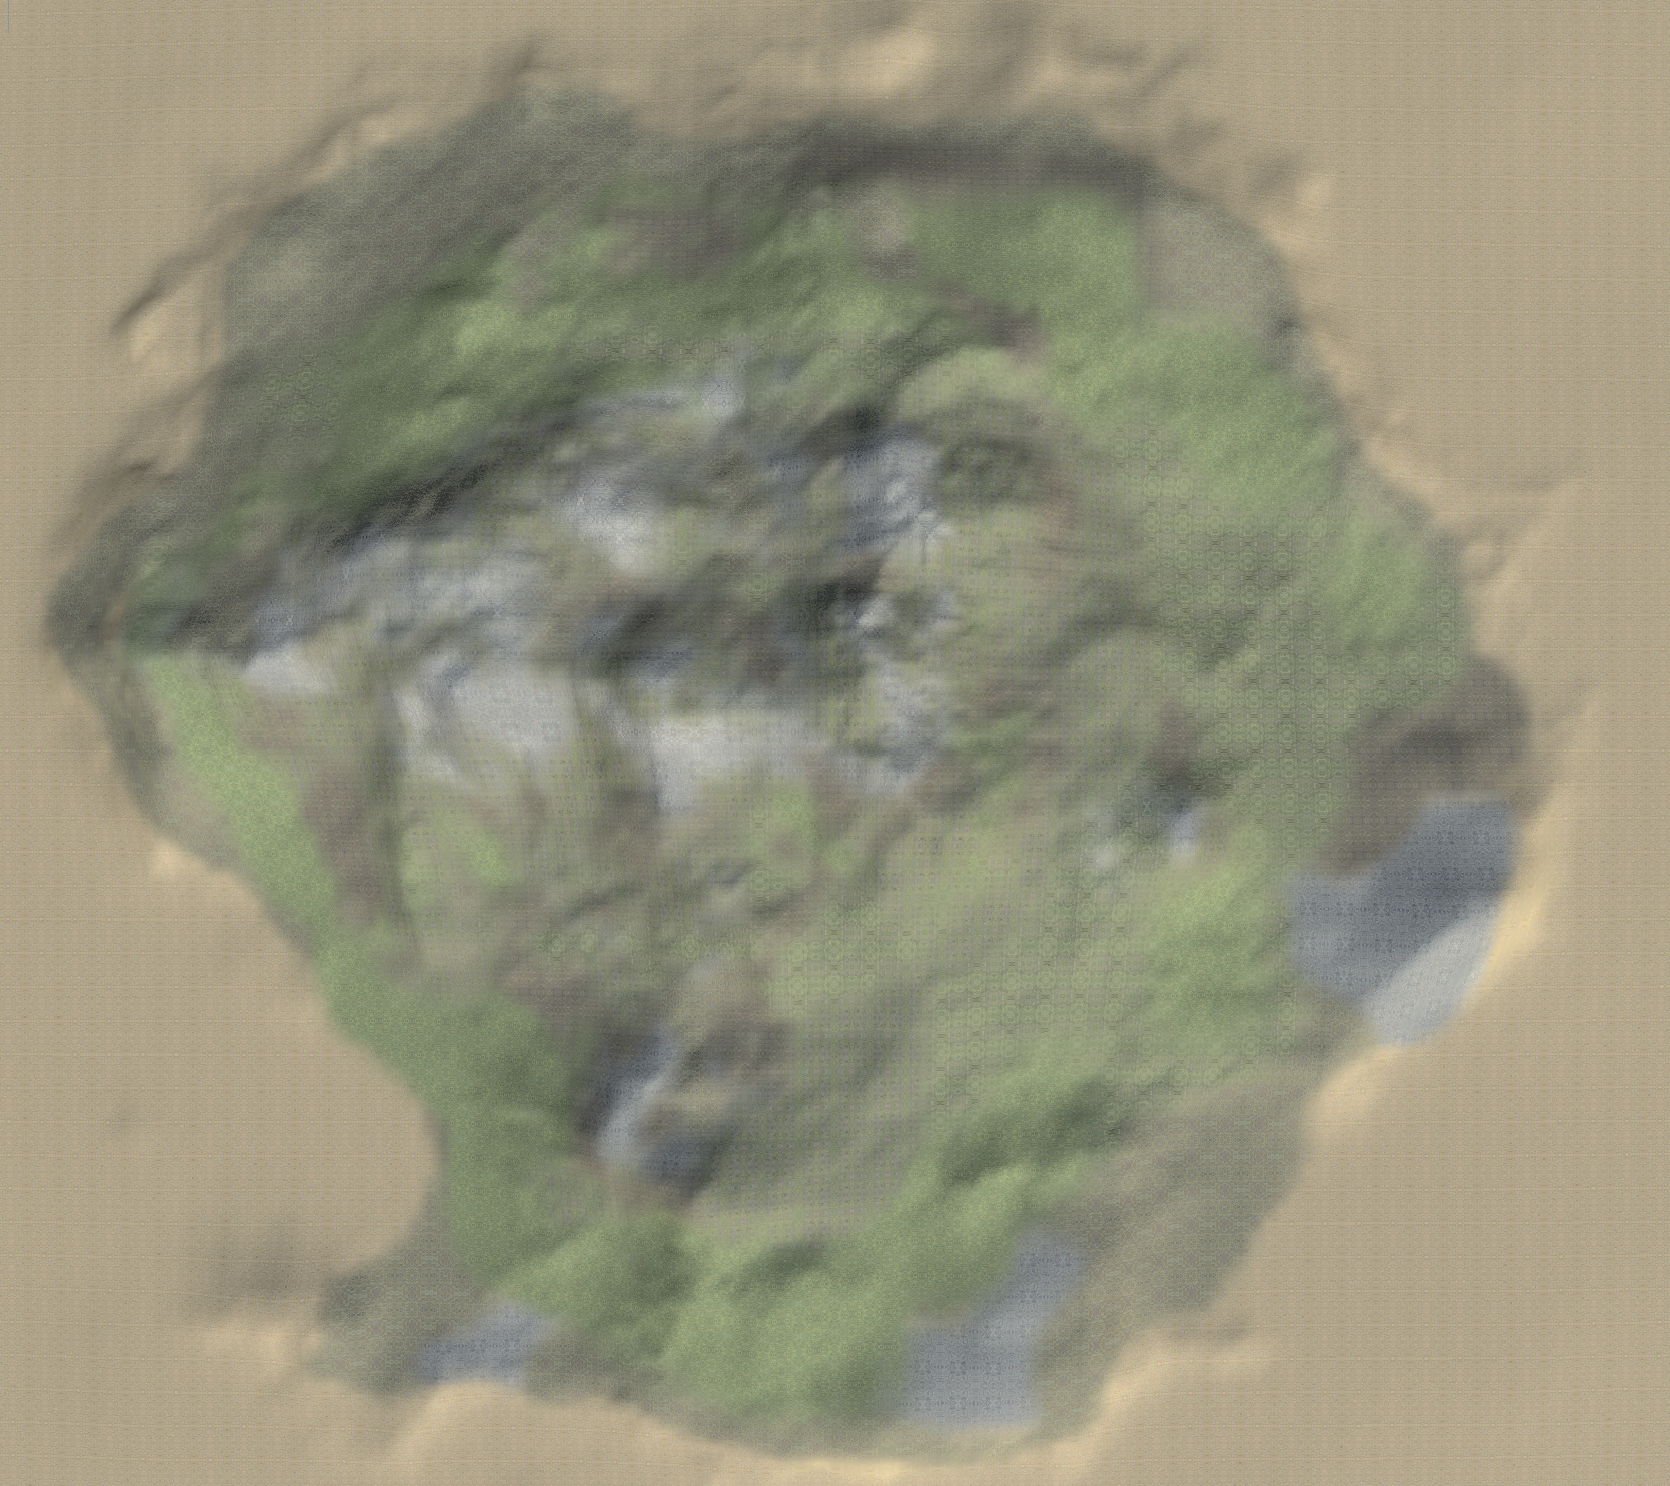 Bird's eye view of my progress on texturing my own height map of the island